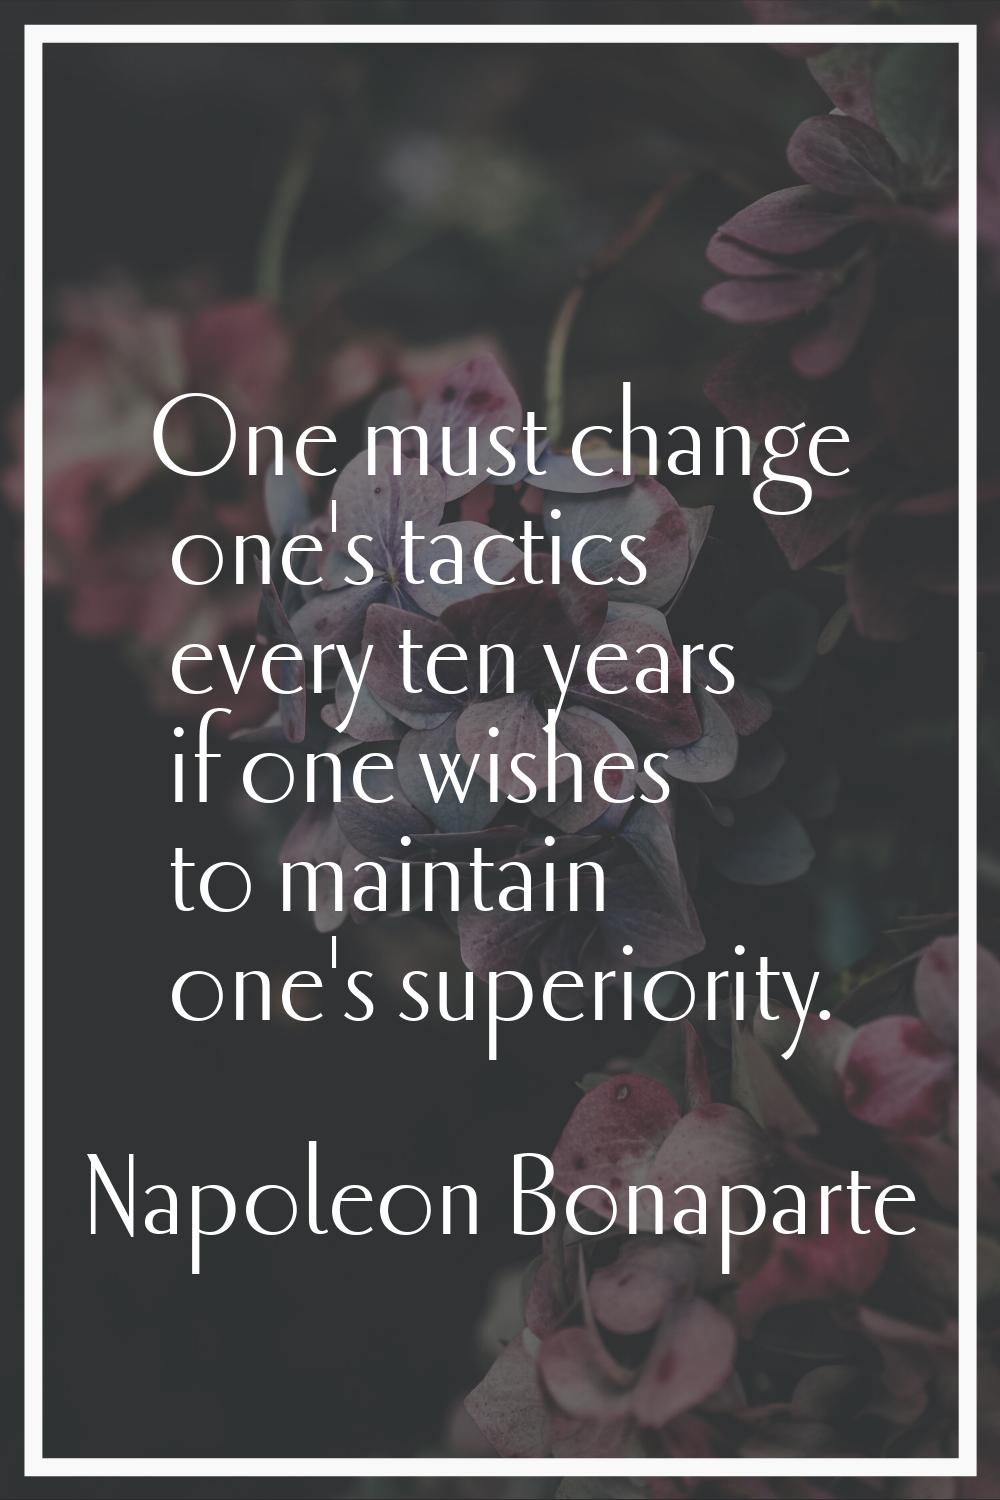 One must change one's tactics every ten years if one wishes to maintain one's superiority.